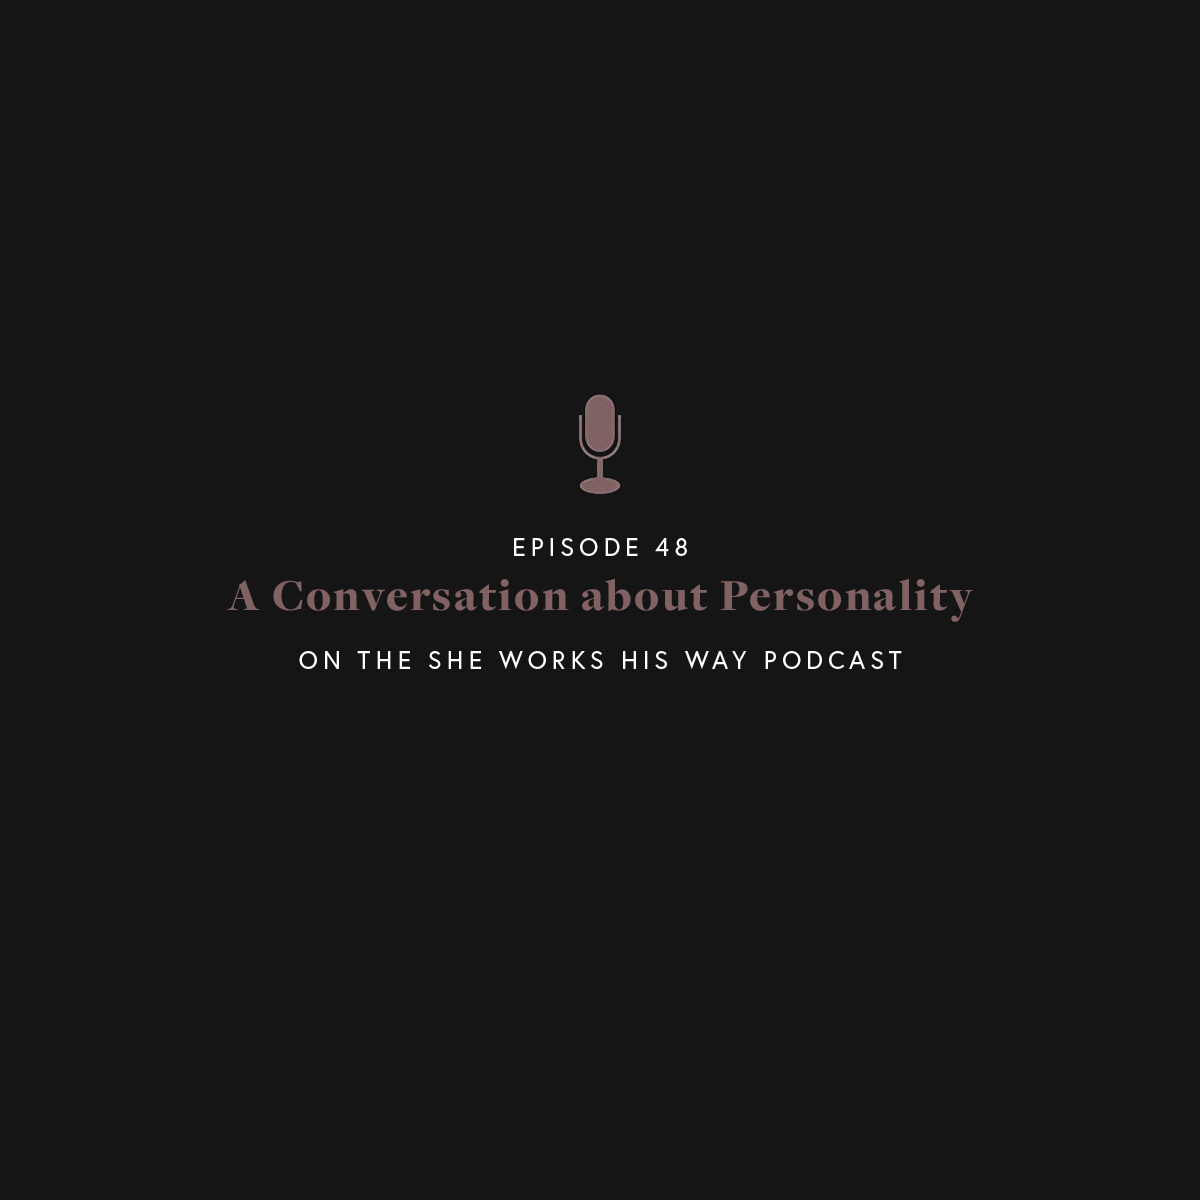 Episode 48 - A Conversation about Personality - The She Works His Way Podcast